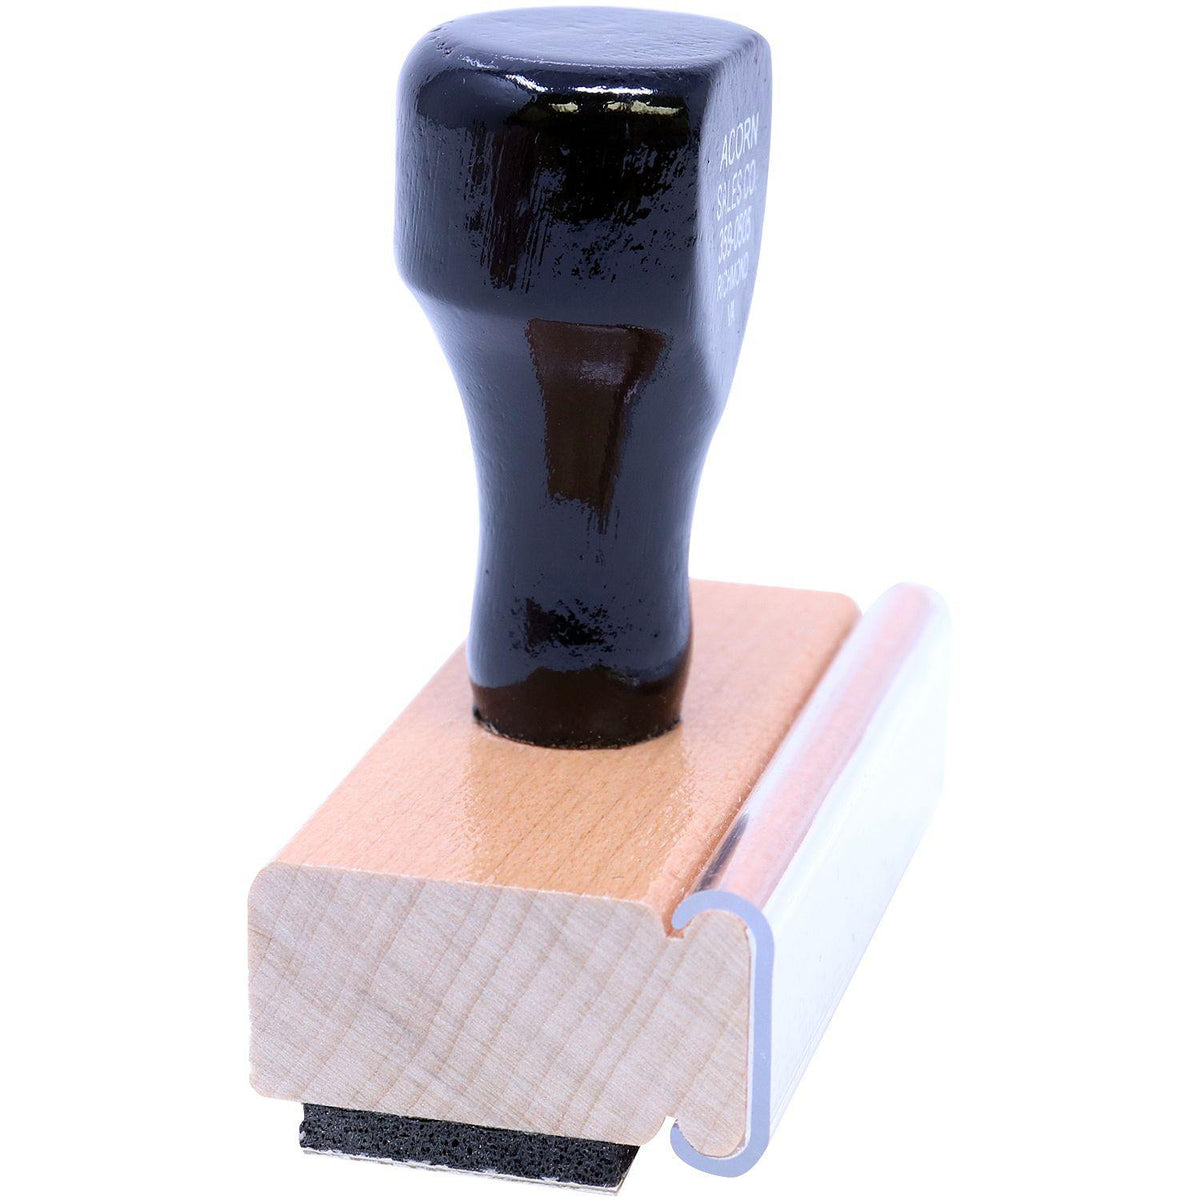 Rush with Rabbit Rubber Stamp - Engineer Seal Stamps - Brand_Acorn, Impression Size_Small, Stamp Type_Regular Stamp, Type of Use_Postal &amp; Mailing, Type of Use_Shipping &amp; Receiving